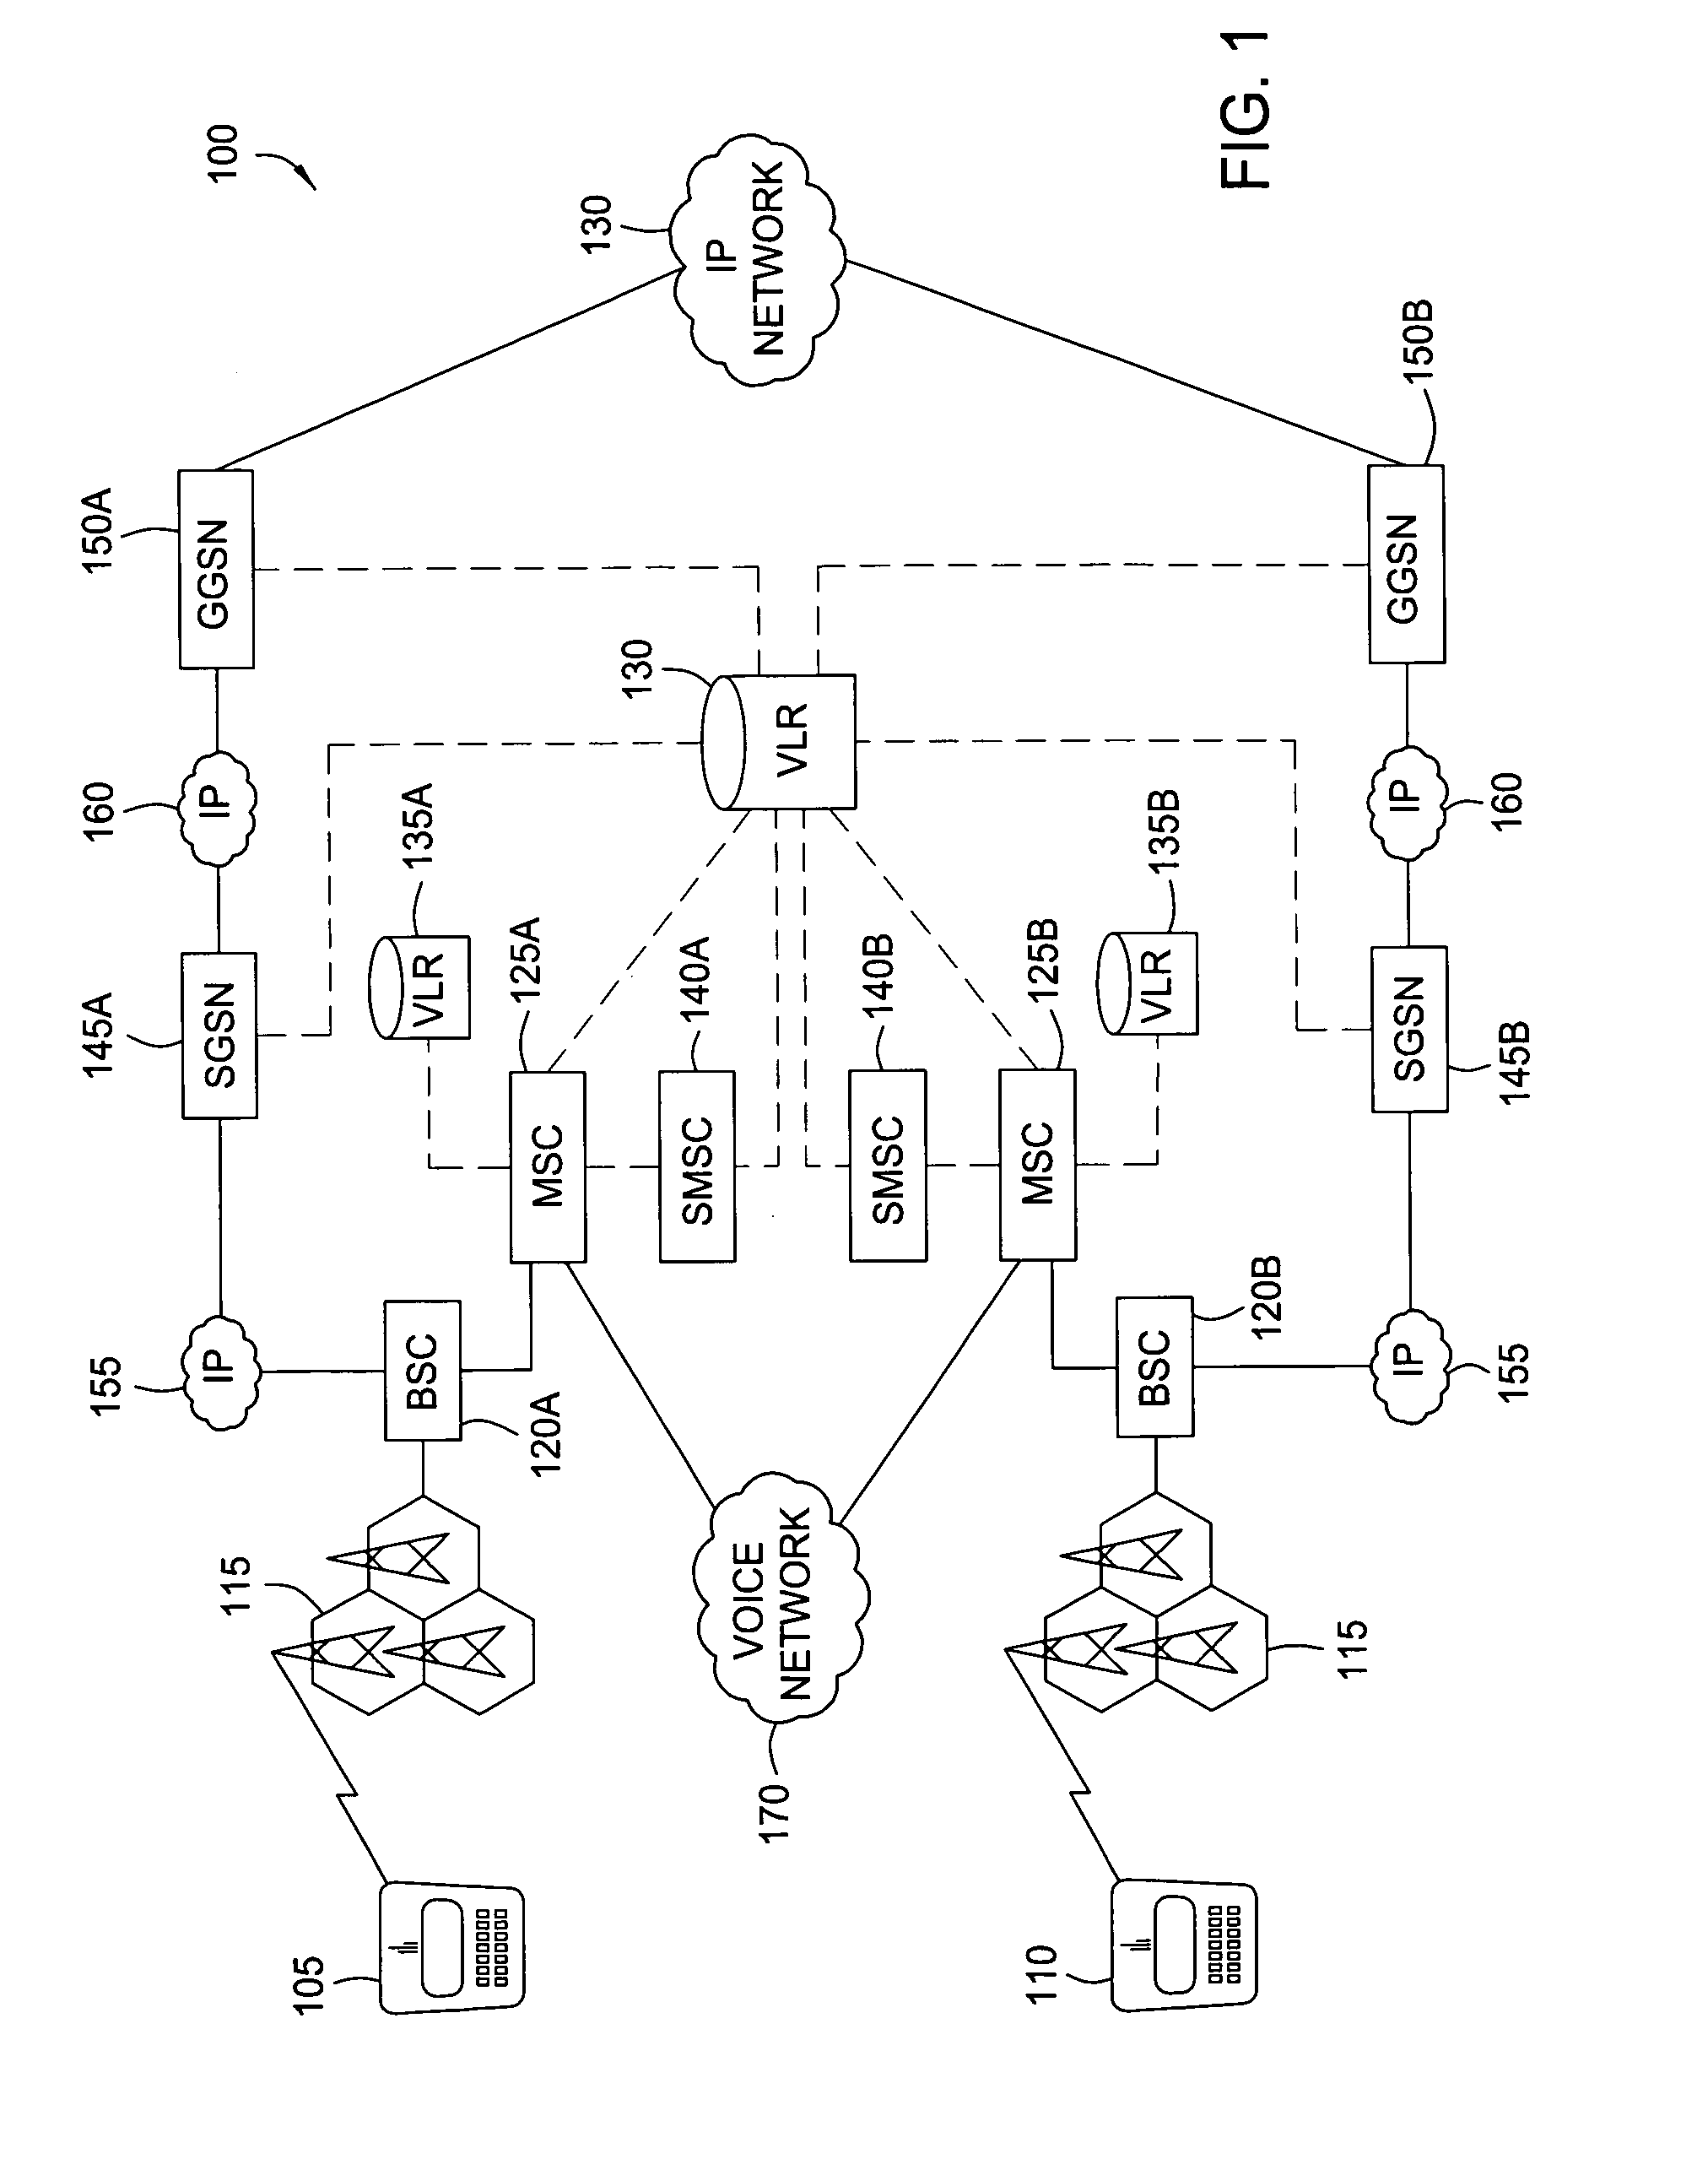 Peer-to-peer mobile instant messaging method and device